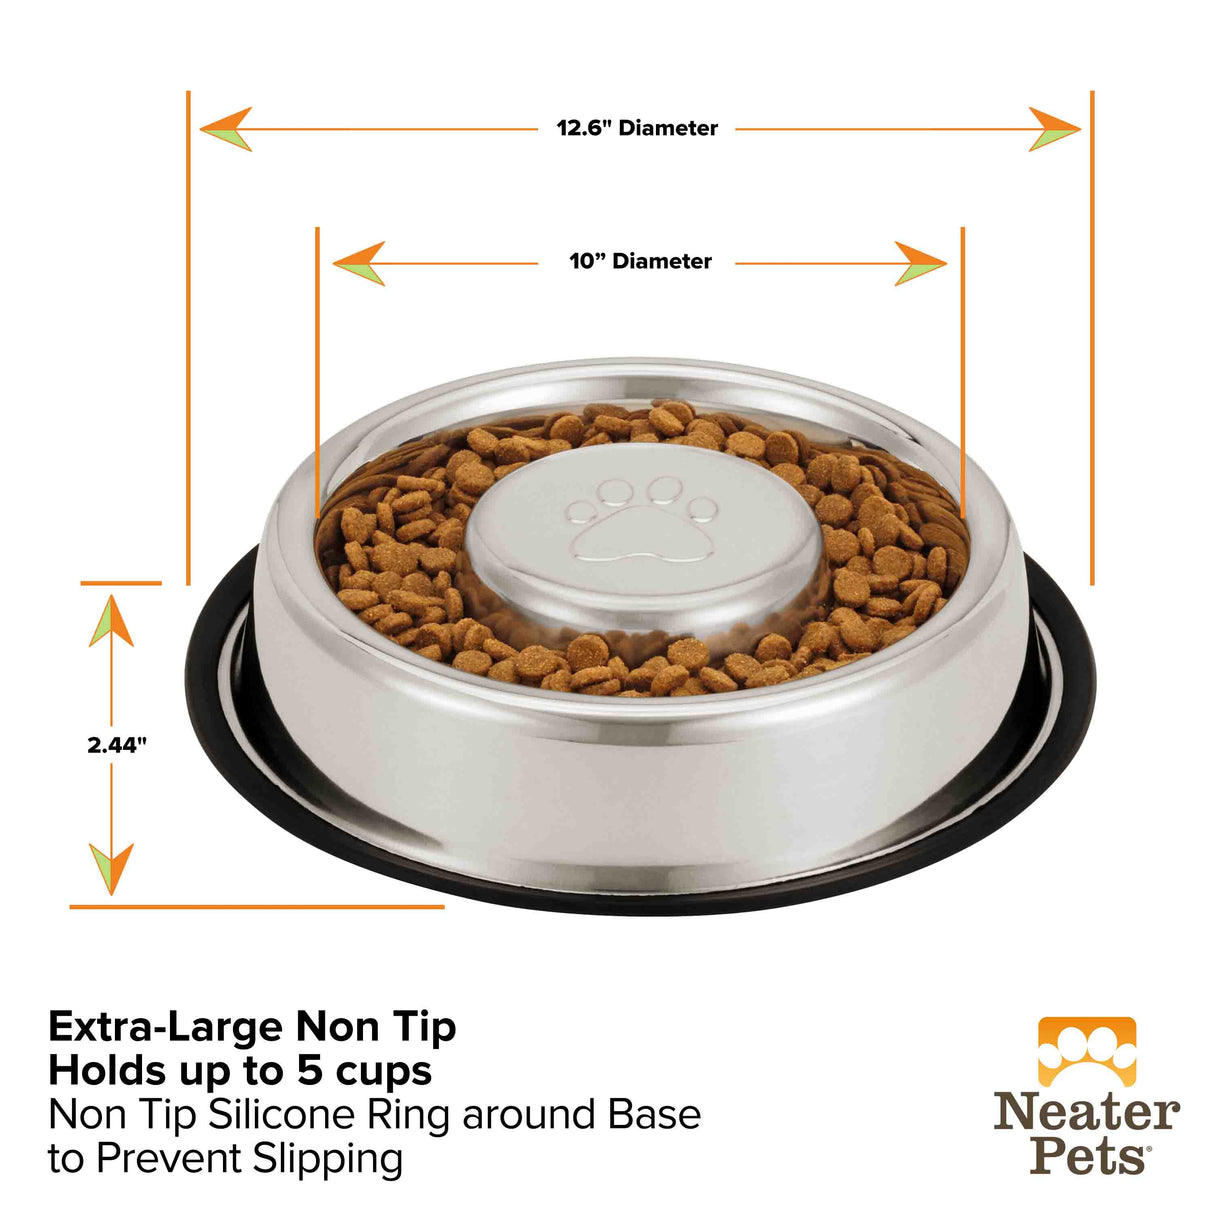 Extra Large Non-Tip Slow Feed Bowl Dimensions